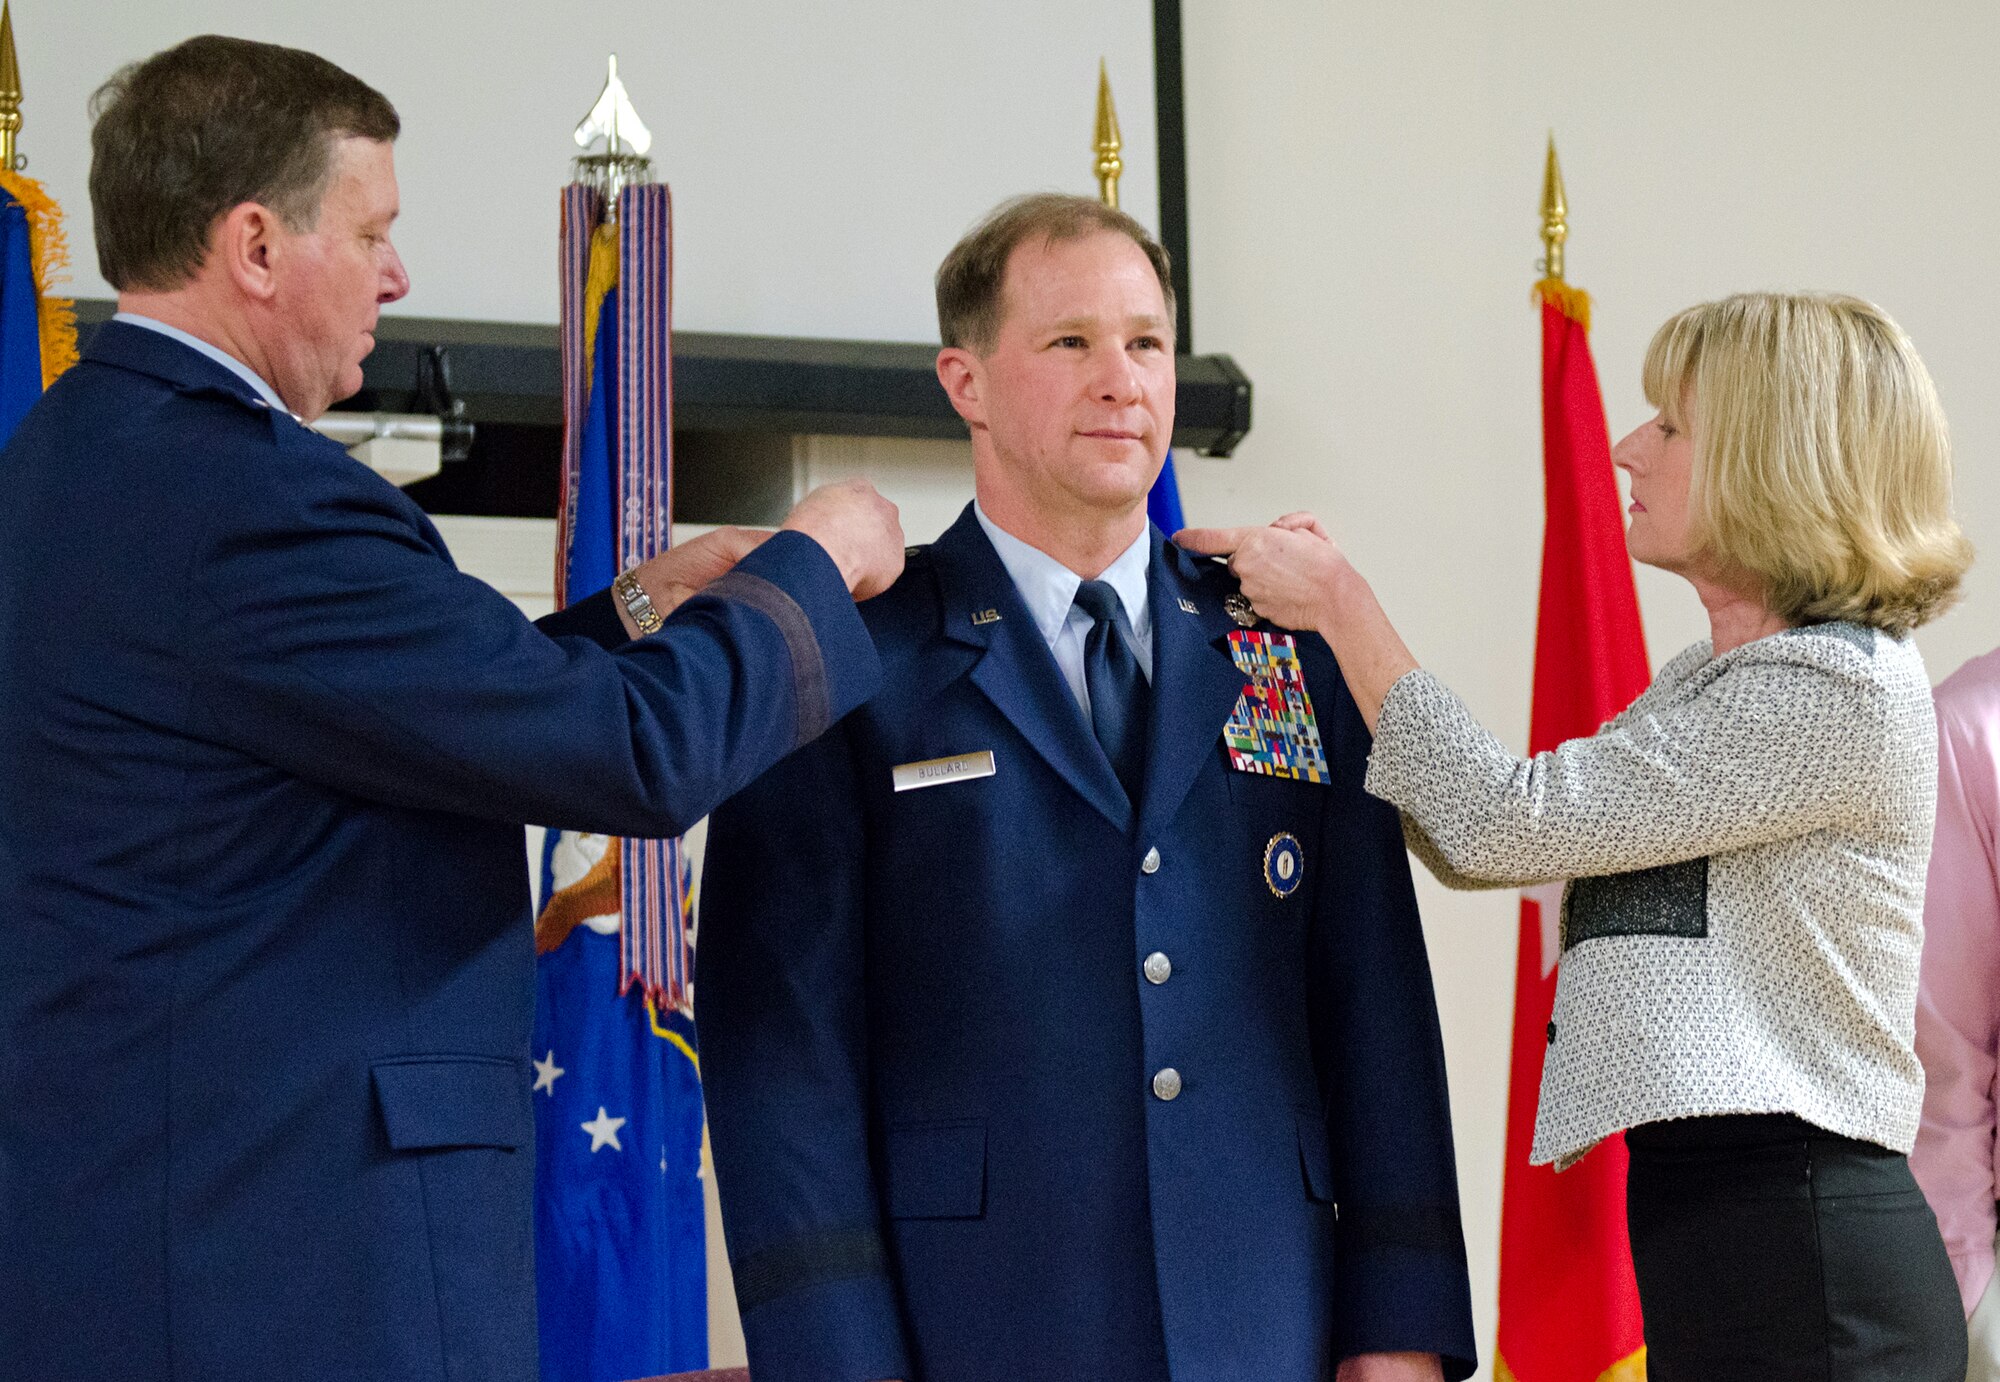 Steven P. Bullard (center), chief of staff for Headquarters, Kentucky Air National Guard, is promoted to the rank of brigadier general during a ceremony held at the Kentucky Air National Guard Base in Louisville, Ky., Feb. 7, 2015. Pinning new rank insignia to Bullard’s uniform are his wife, Janice, and Maj. Gen. Edward W. Tonini, adjutant general for the Commonwealth of Kentucky. (U.S. Air National Guard photo by Master Sgt. Phil Speck)